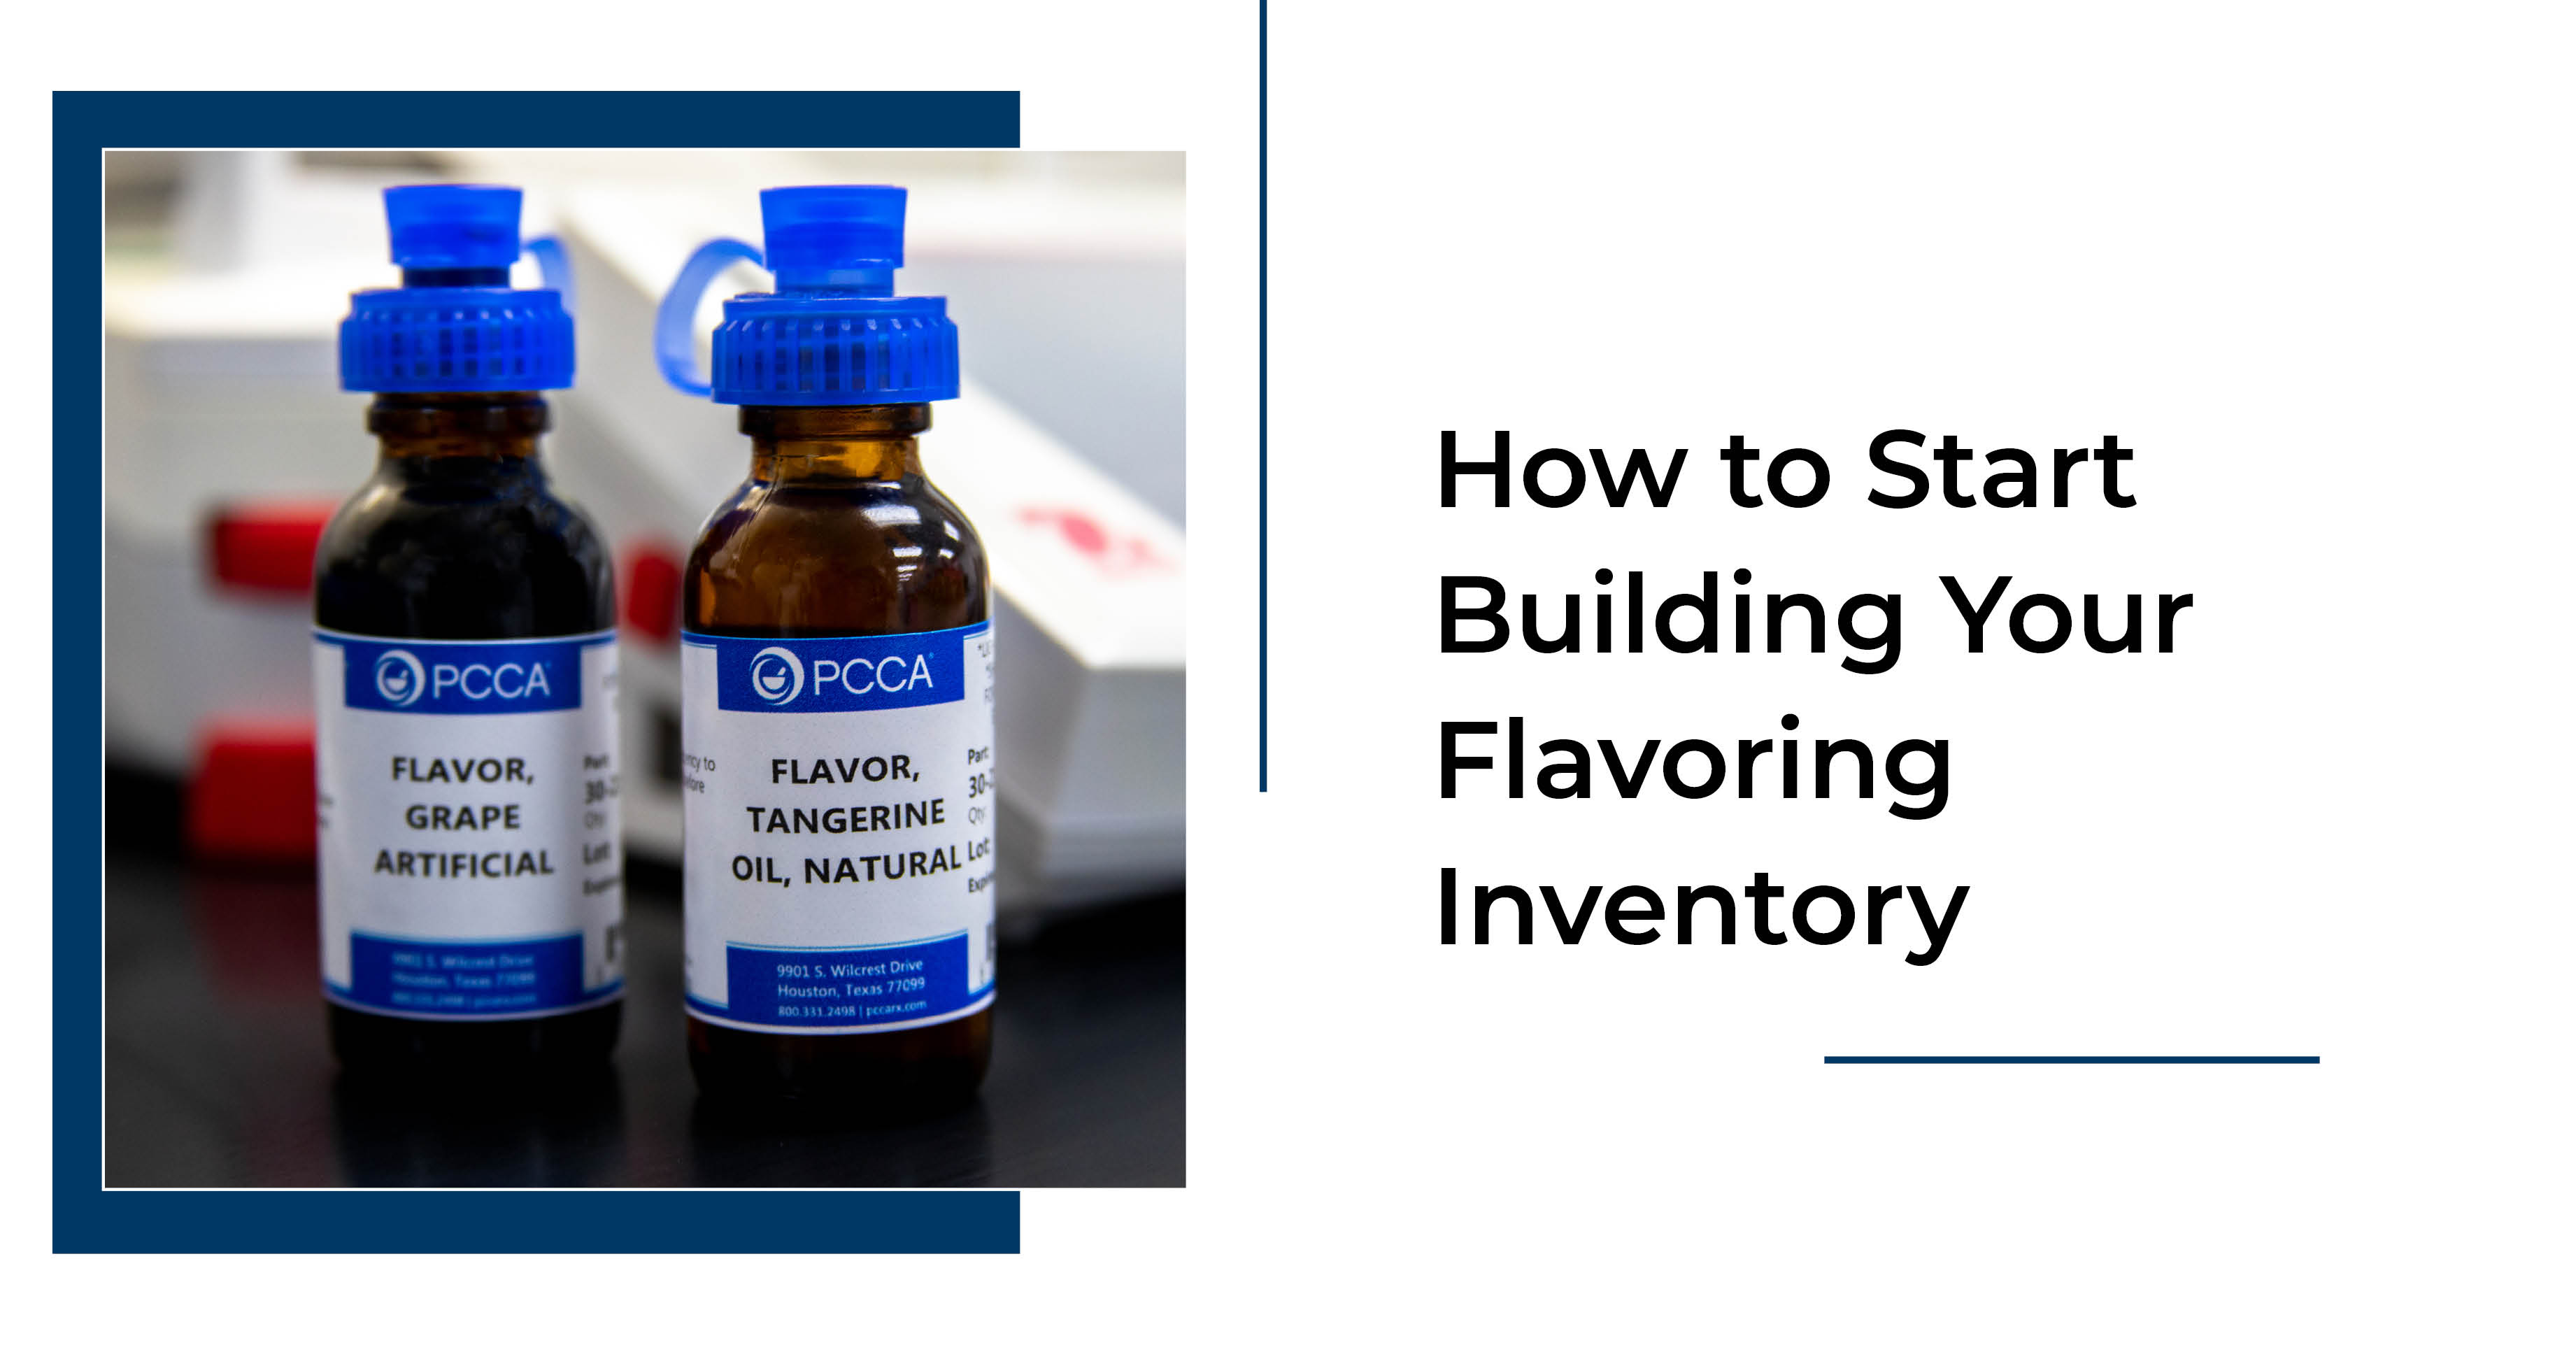 How_to_Start_Building_Your_Flavoring_Inventory.jpg